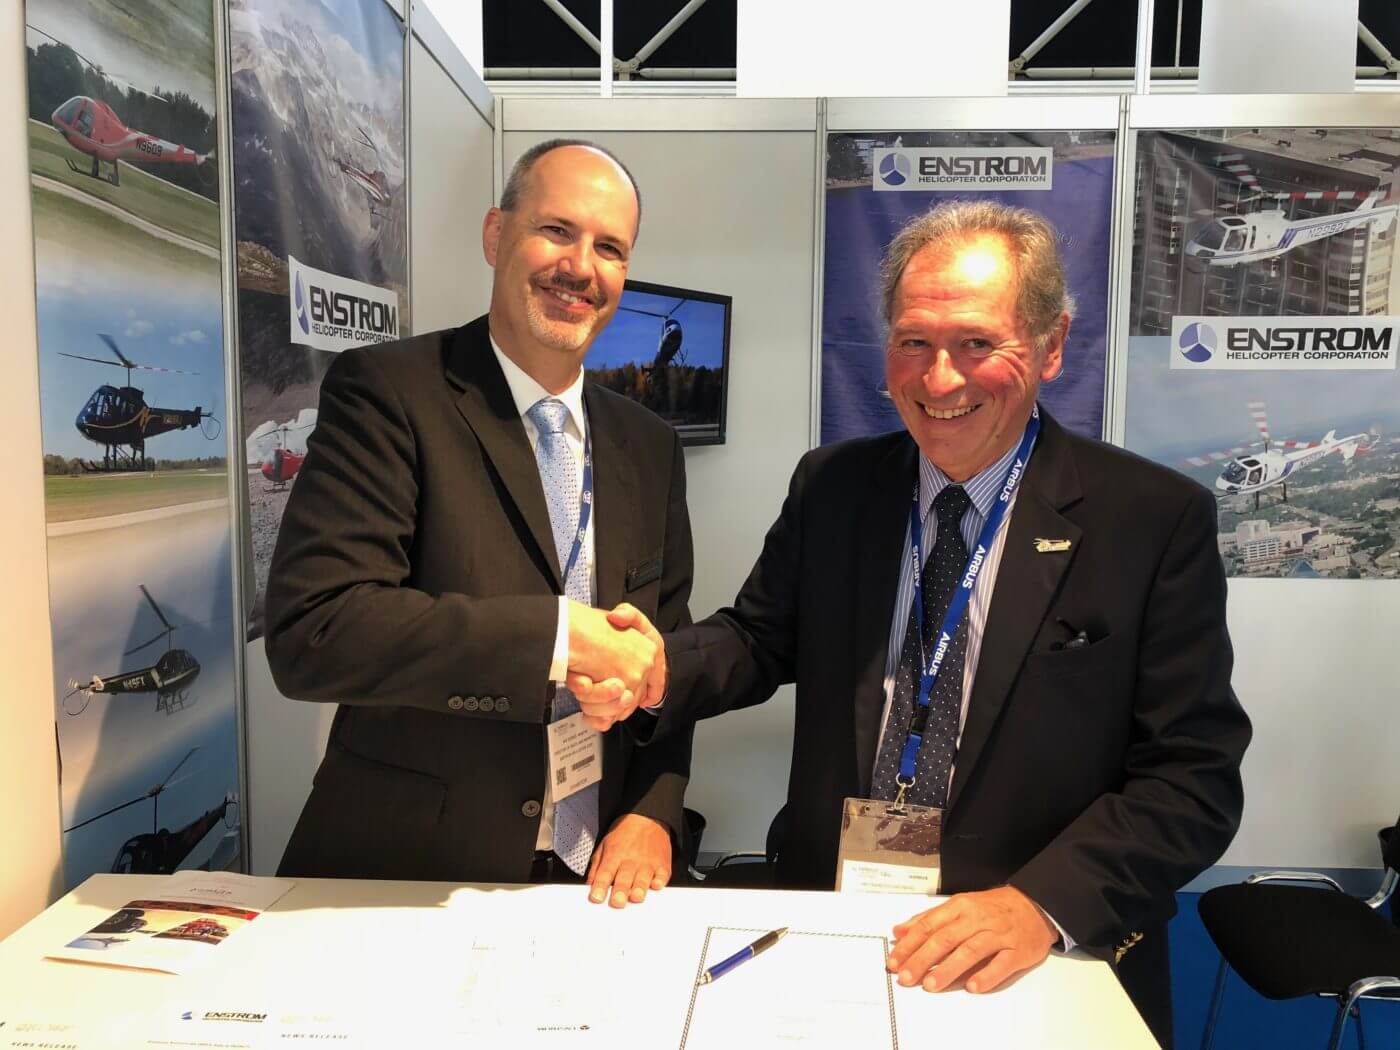 The signing took place on Oct. 17 at the Enstrom booth at Helitech International. Enstrom Photo